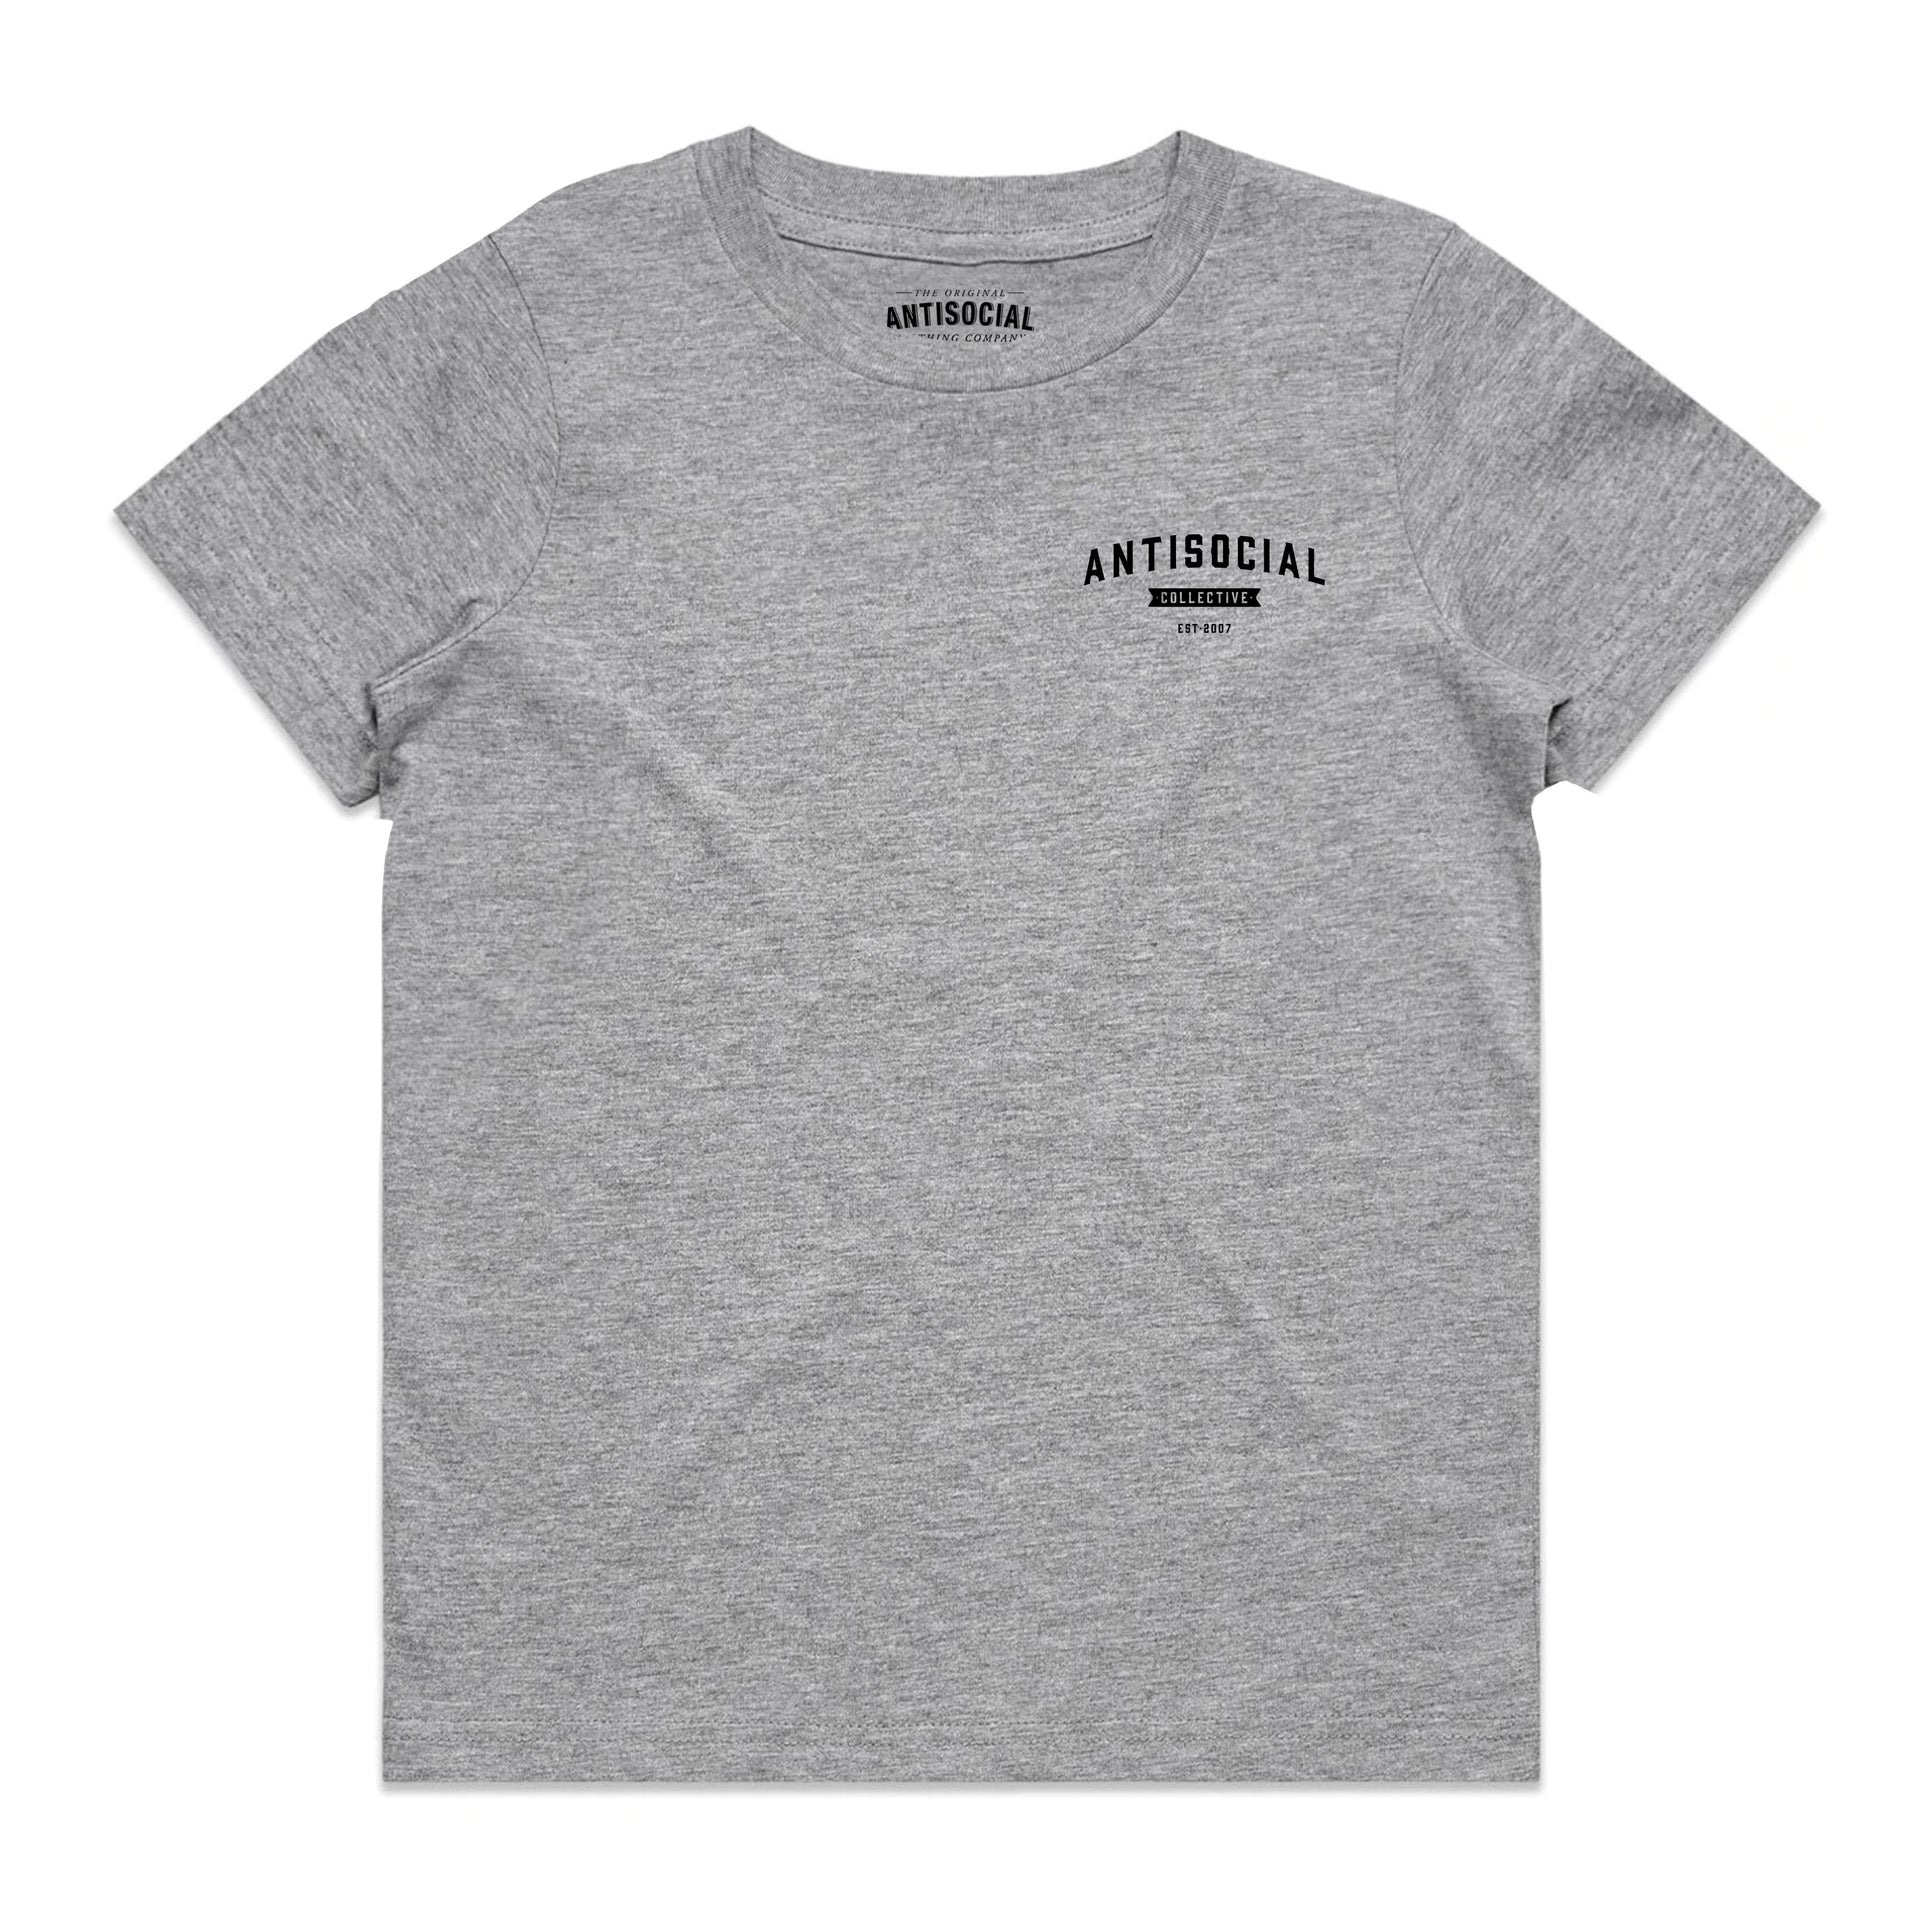 ANTISOCIAL - ASC SHOP LOGO TEE LITTLE YOUTH - HEATHER GREY - Antisocial Collective